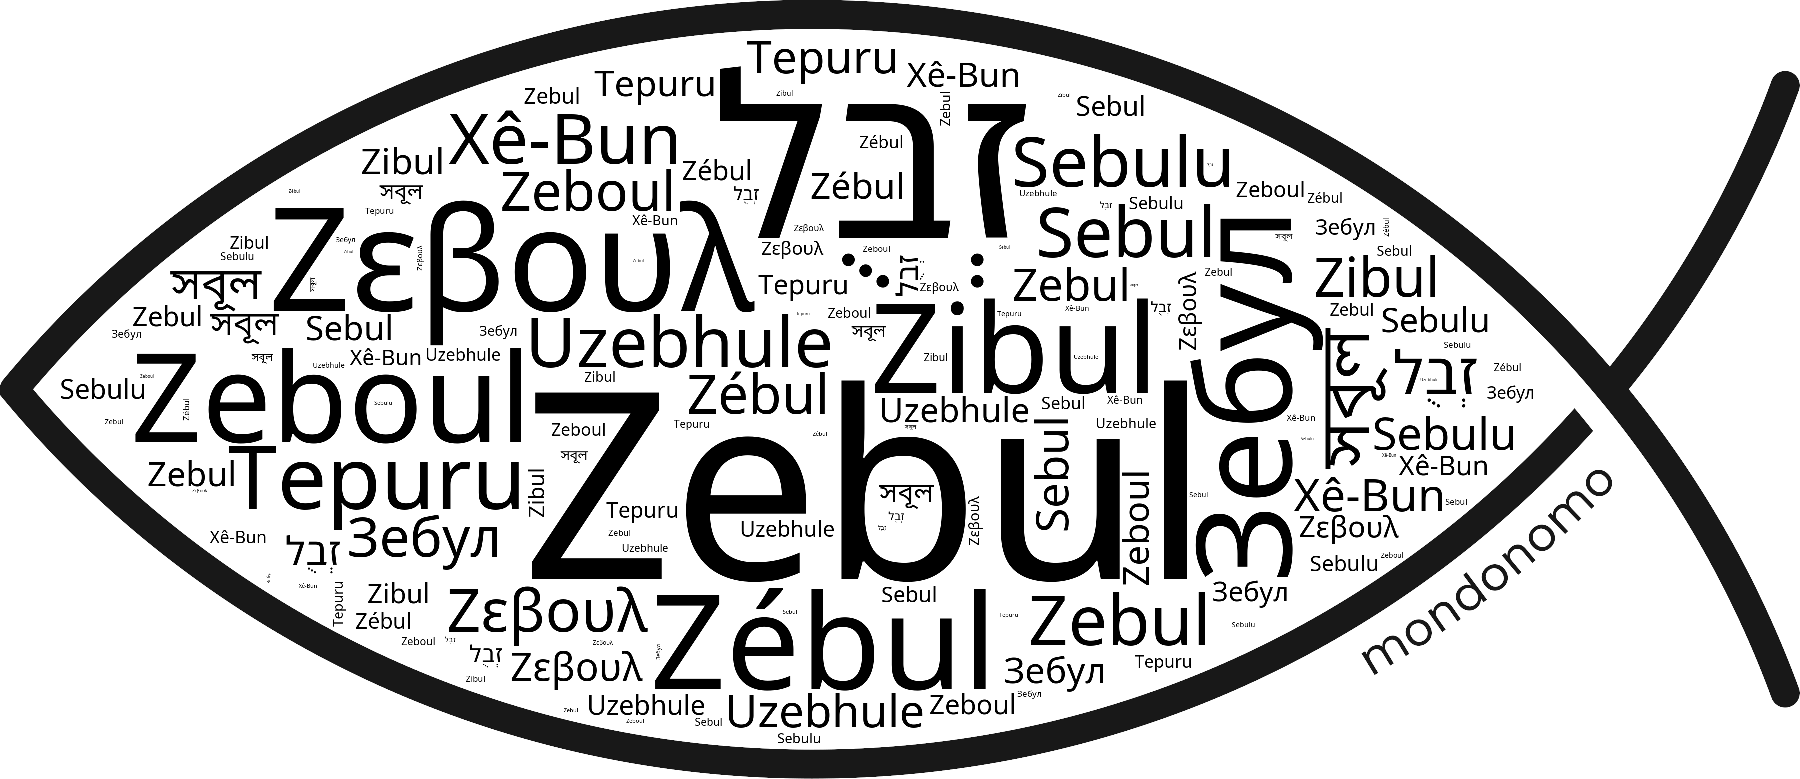 Name Zebul in the world's Bibles